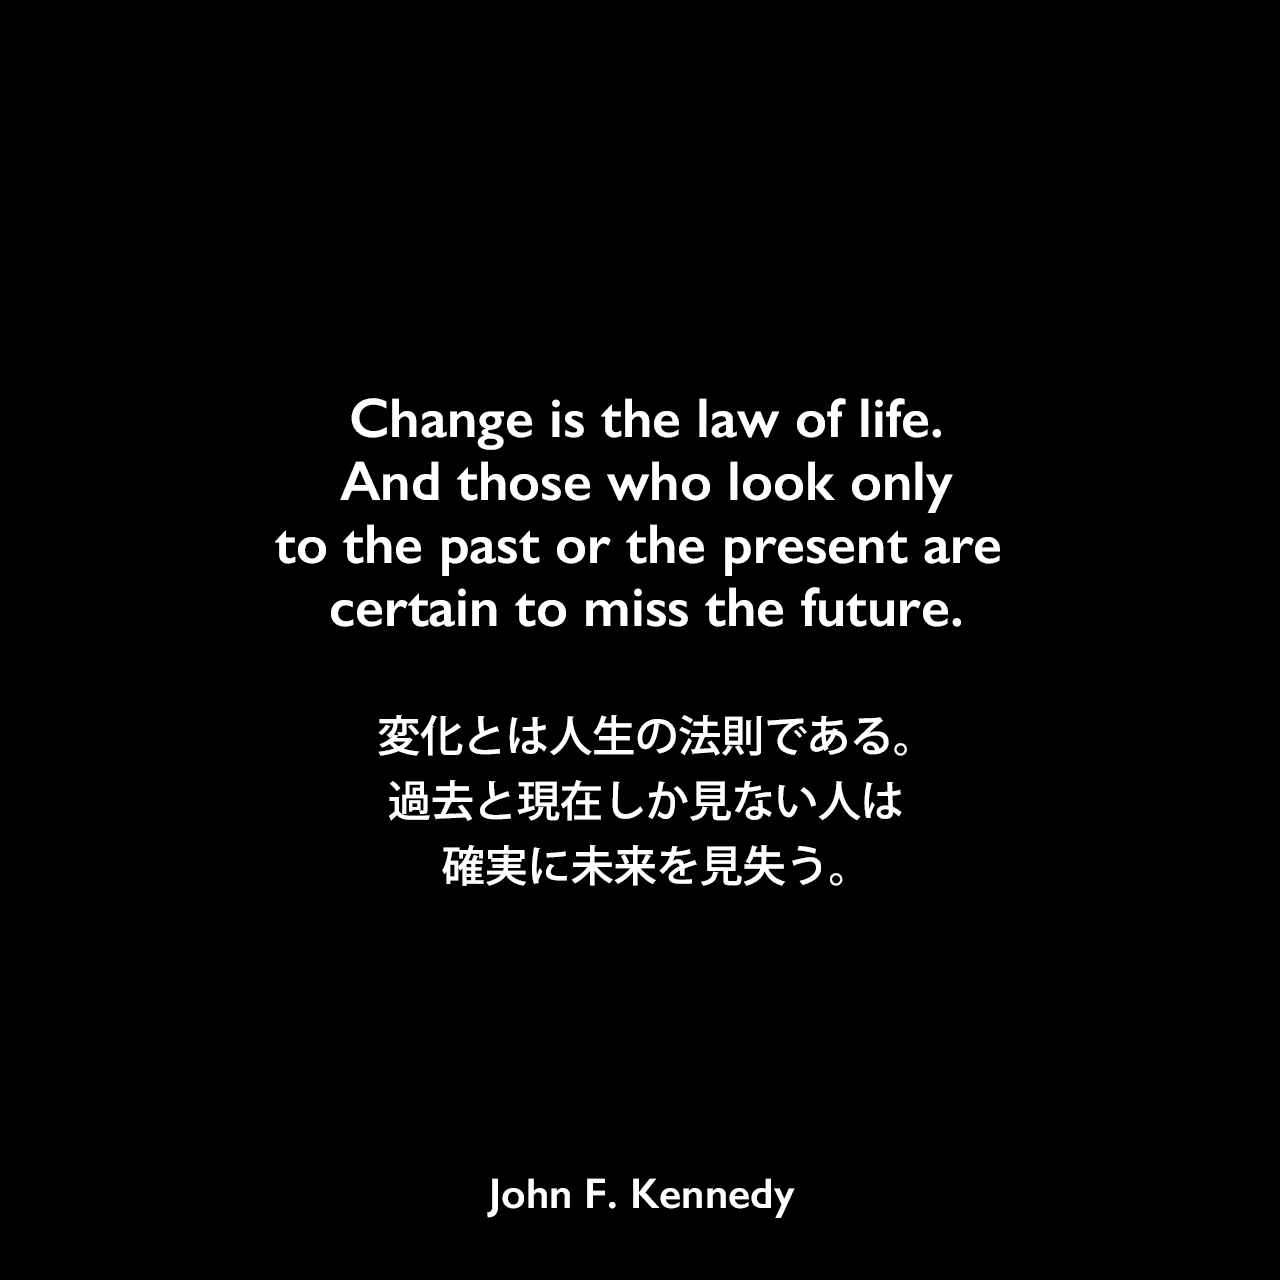 Change is the law of life. And those who look only to the past or the present are certain to miss the future.変化とは人生の法則である。過去と現在しか見ない人は、確実に未来を見失う。- フランクフルト パウロ教会集会場での演説よりJohn F Kennedy